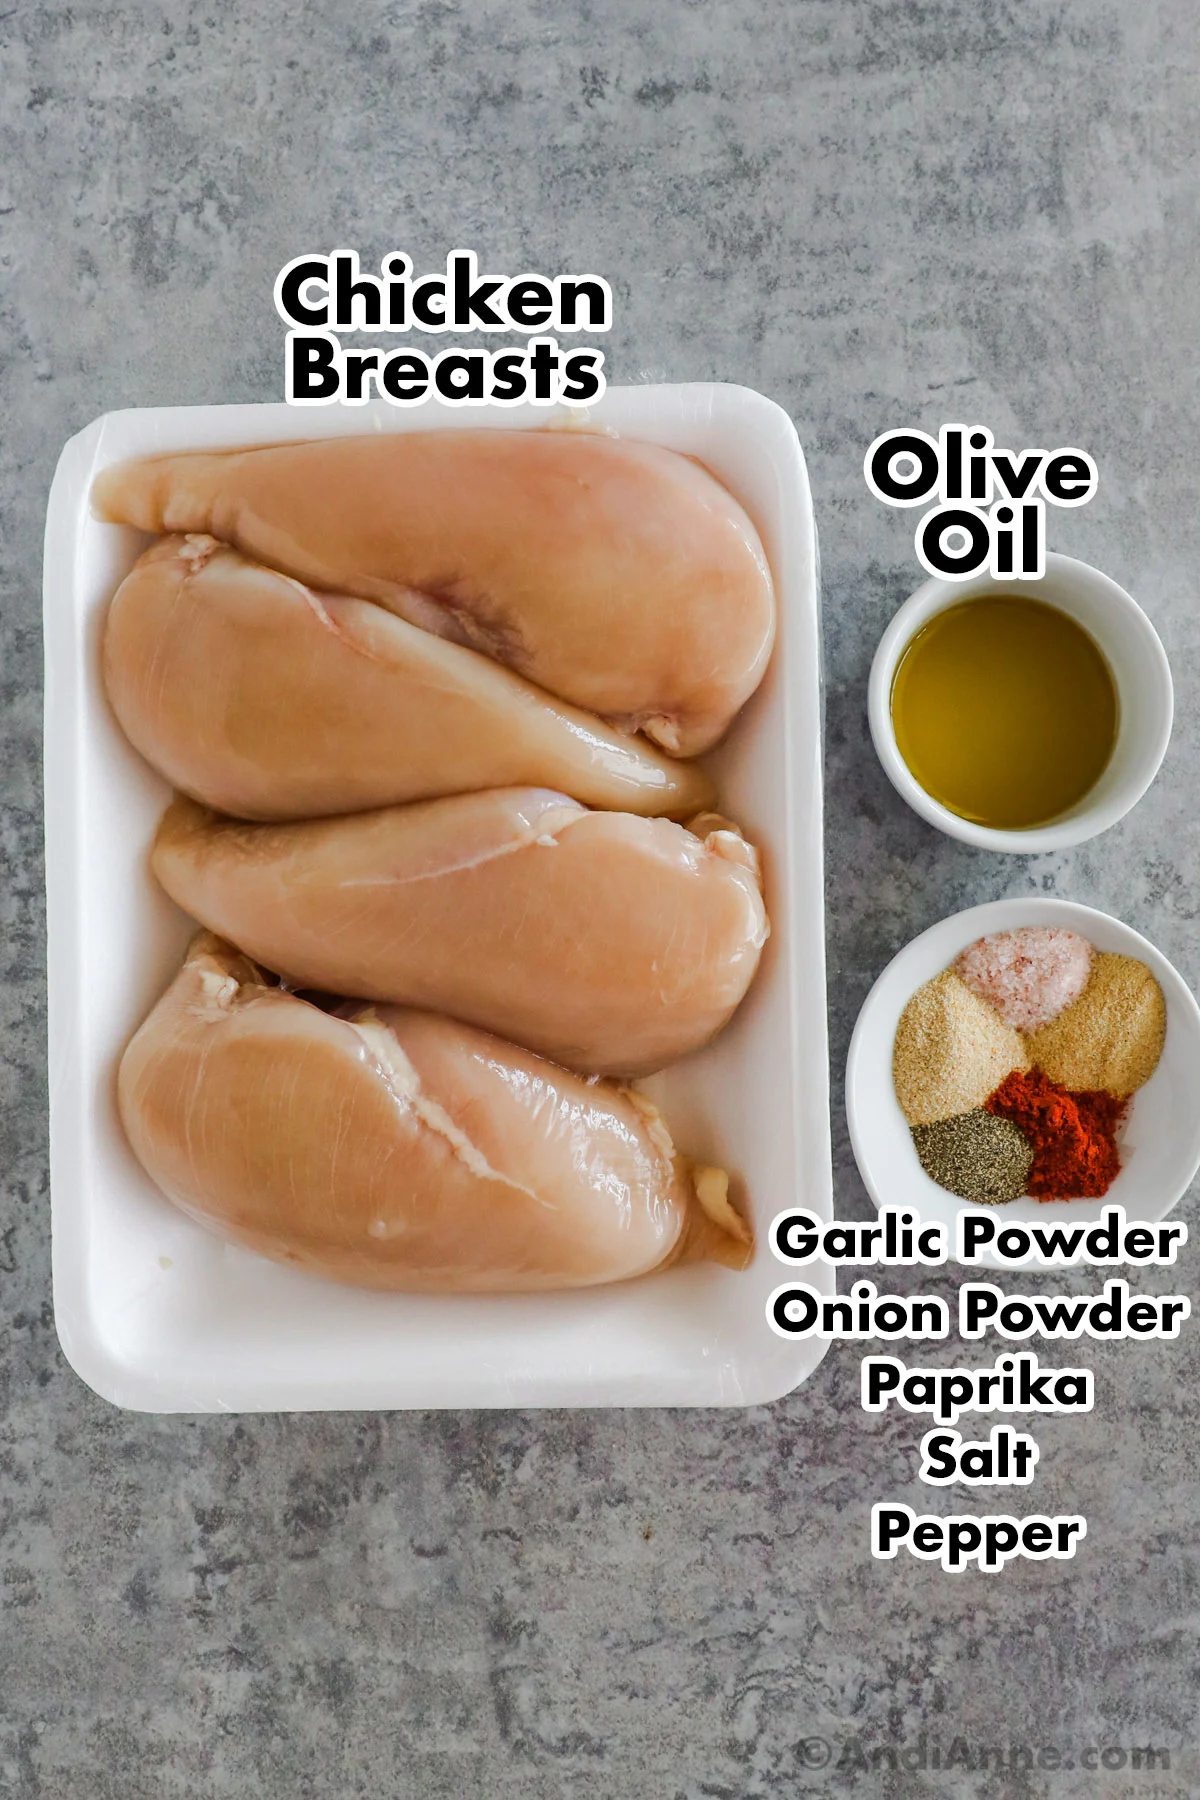 Recipe ingredients on the counter including a tray of four raw chicken breasts, a bowl of olive oil, and bowl of various spices.